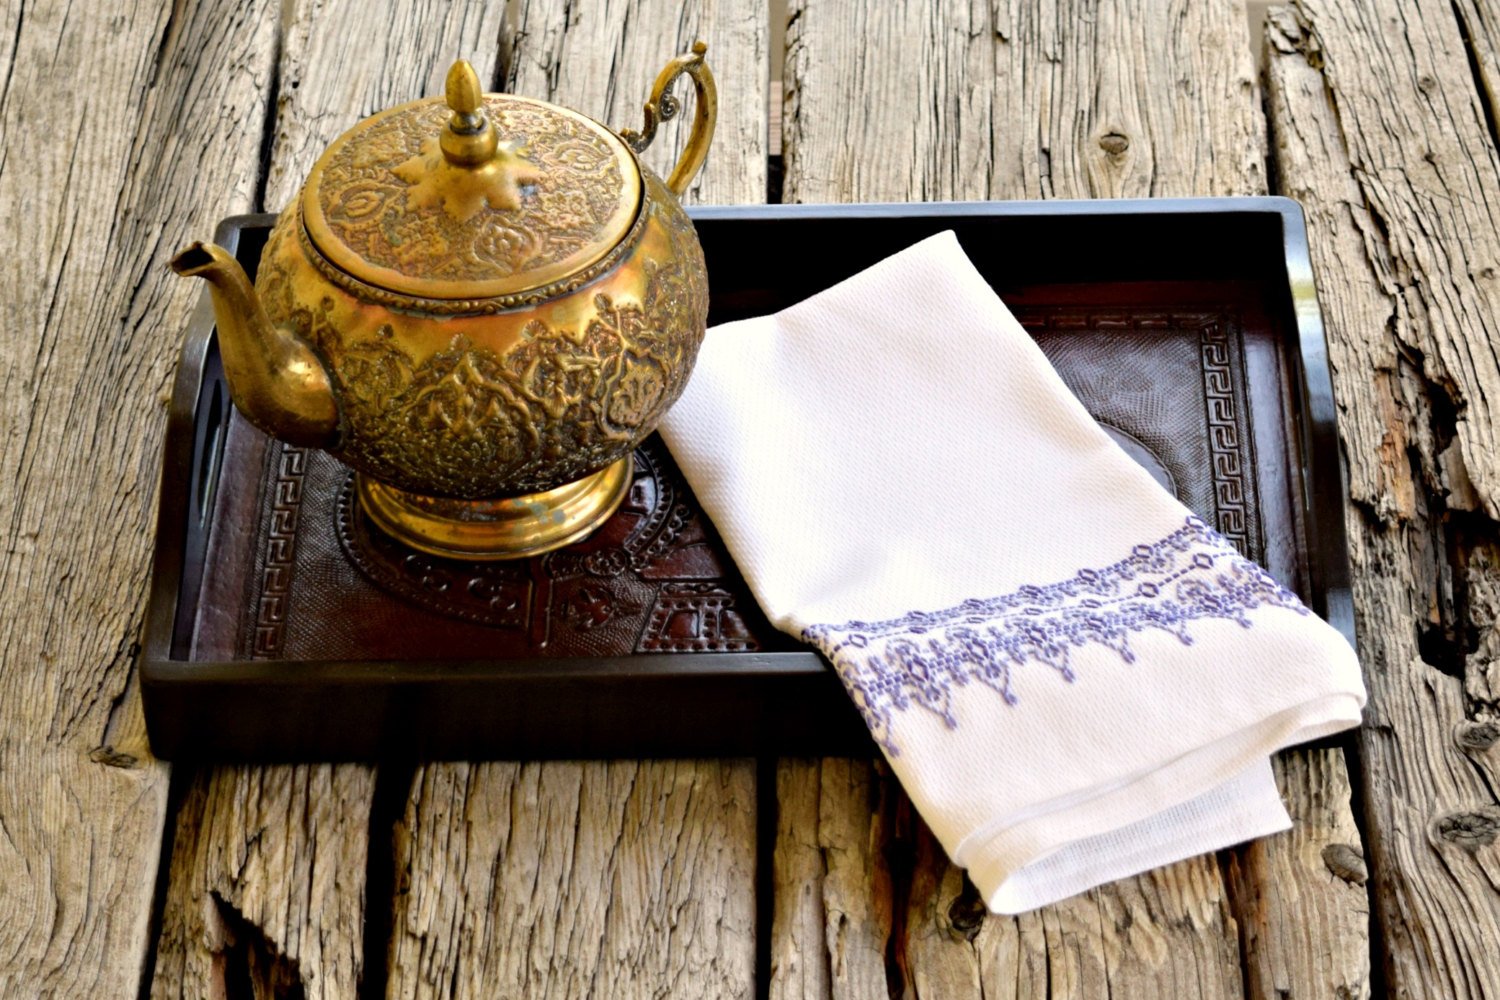 Huck tea towel embroidered in shades of purple on tray with brass teapot